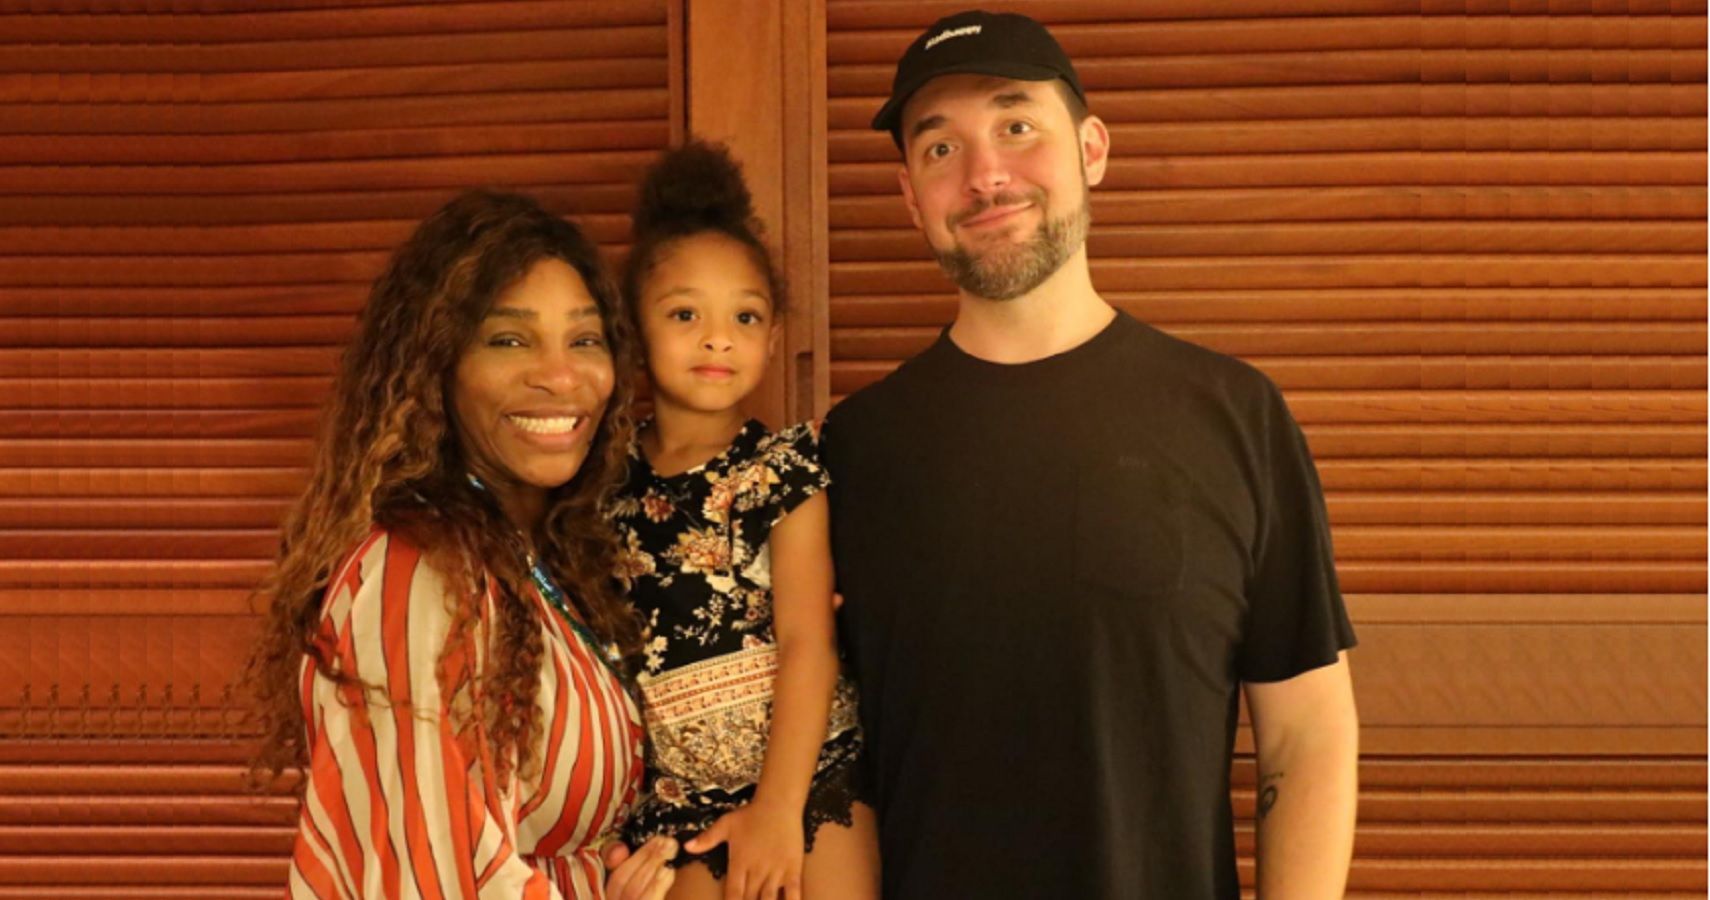 Serena Williams' daughter just made the coolest pancakes